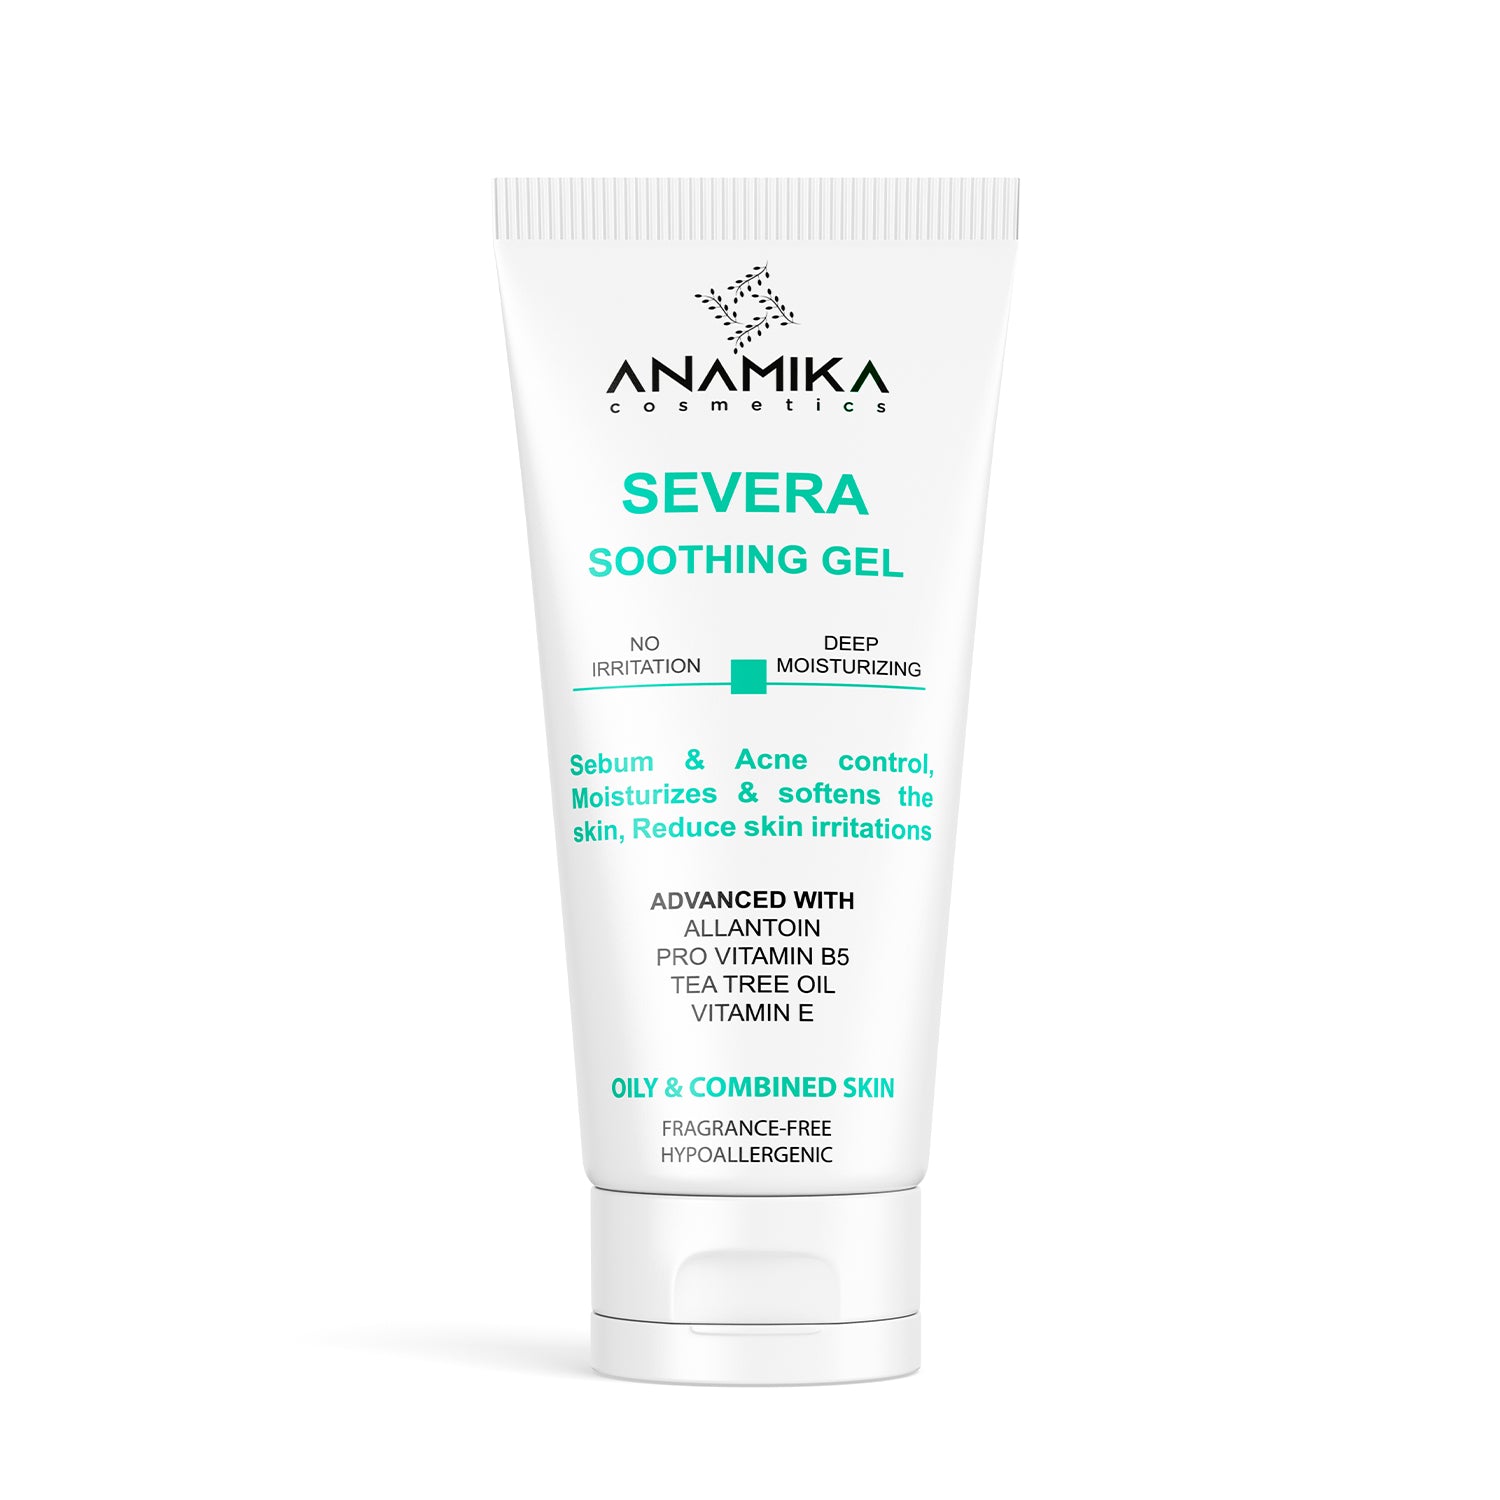 Severa soothing gel for oily and combined skin – 120ml